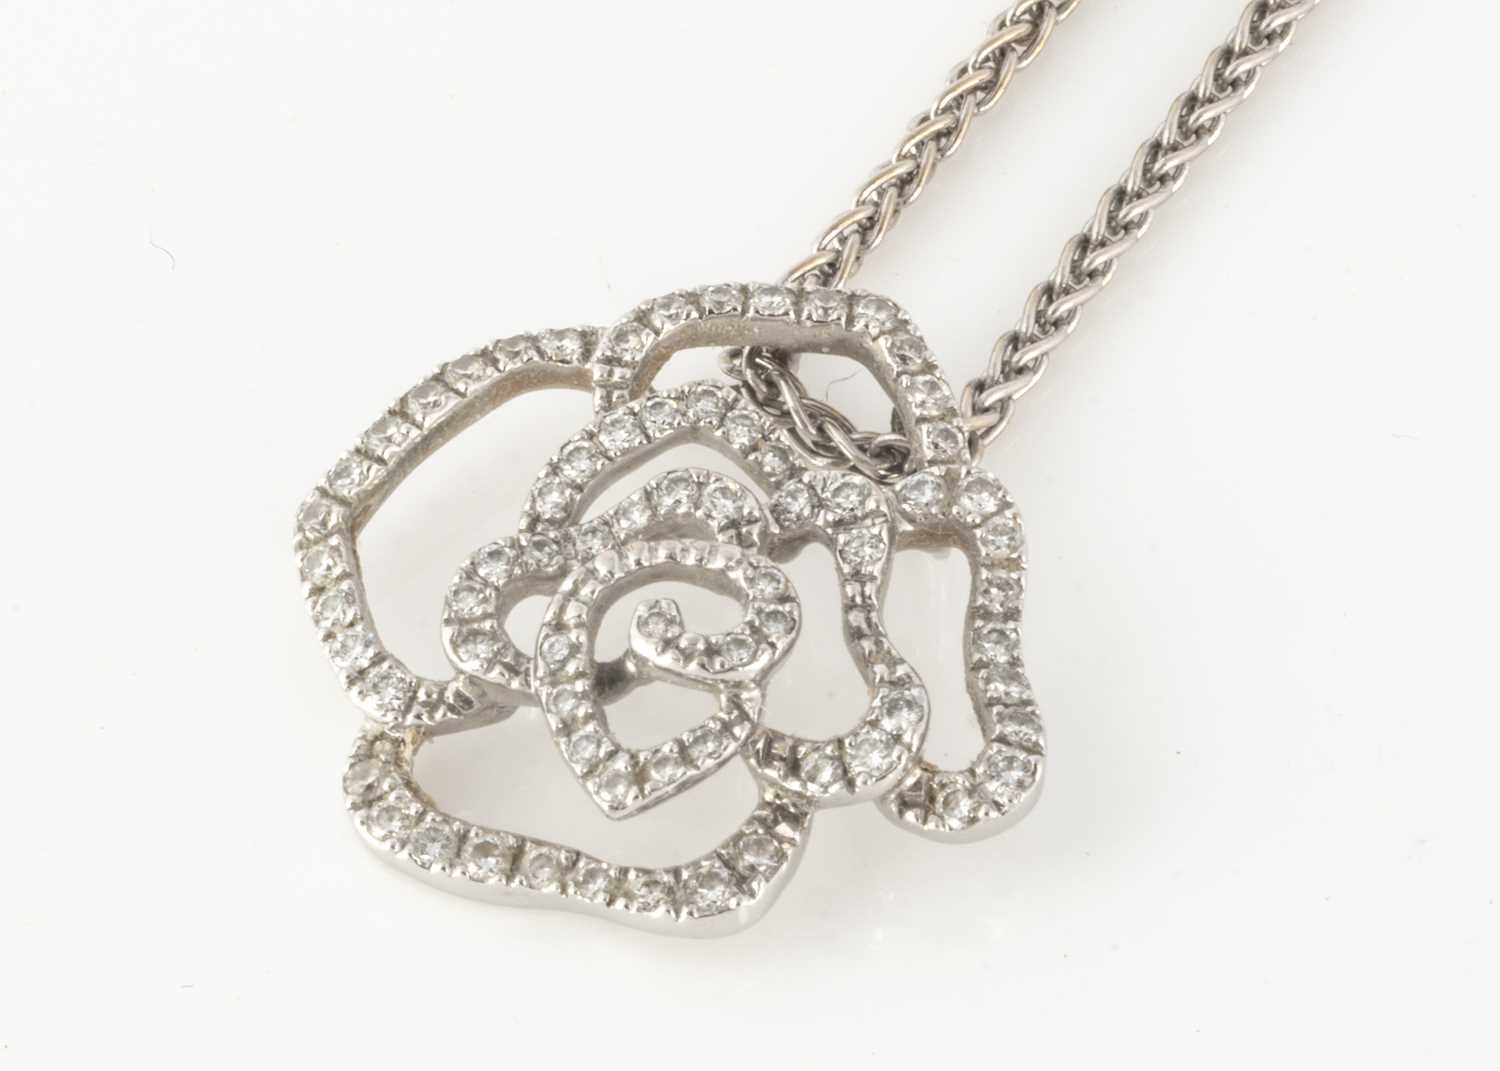 Lot 131 - An 18ct white gold and diamond pendant